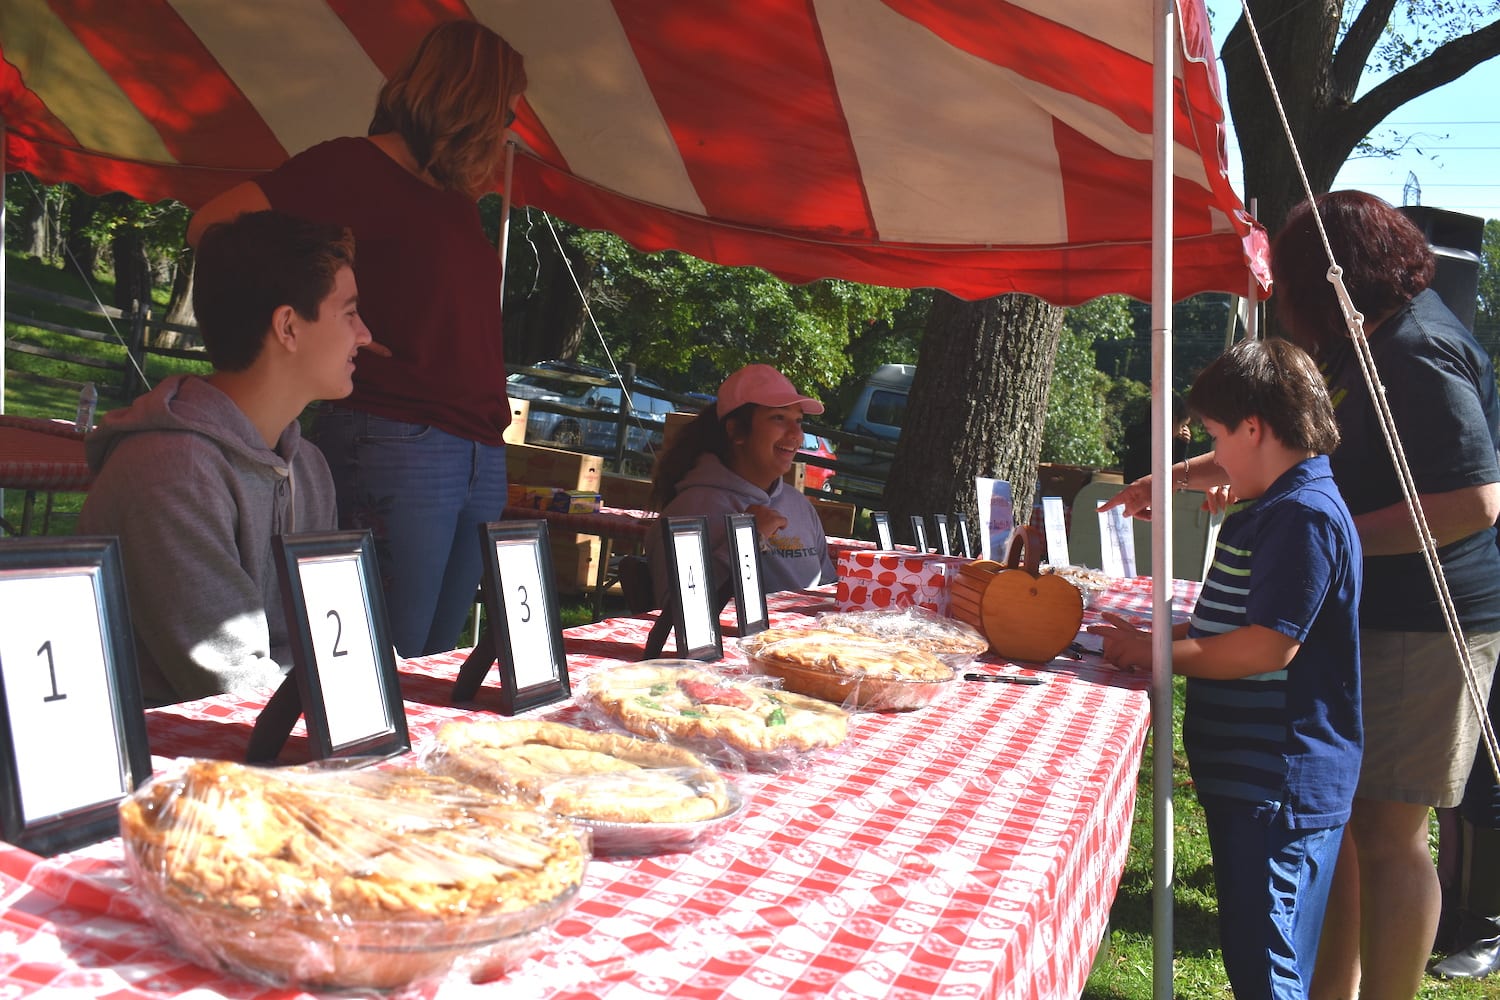 Enter the largest apple pie baking contest on Long Island TBR News Media